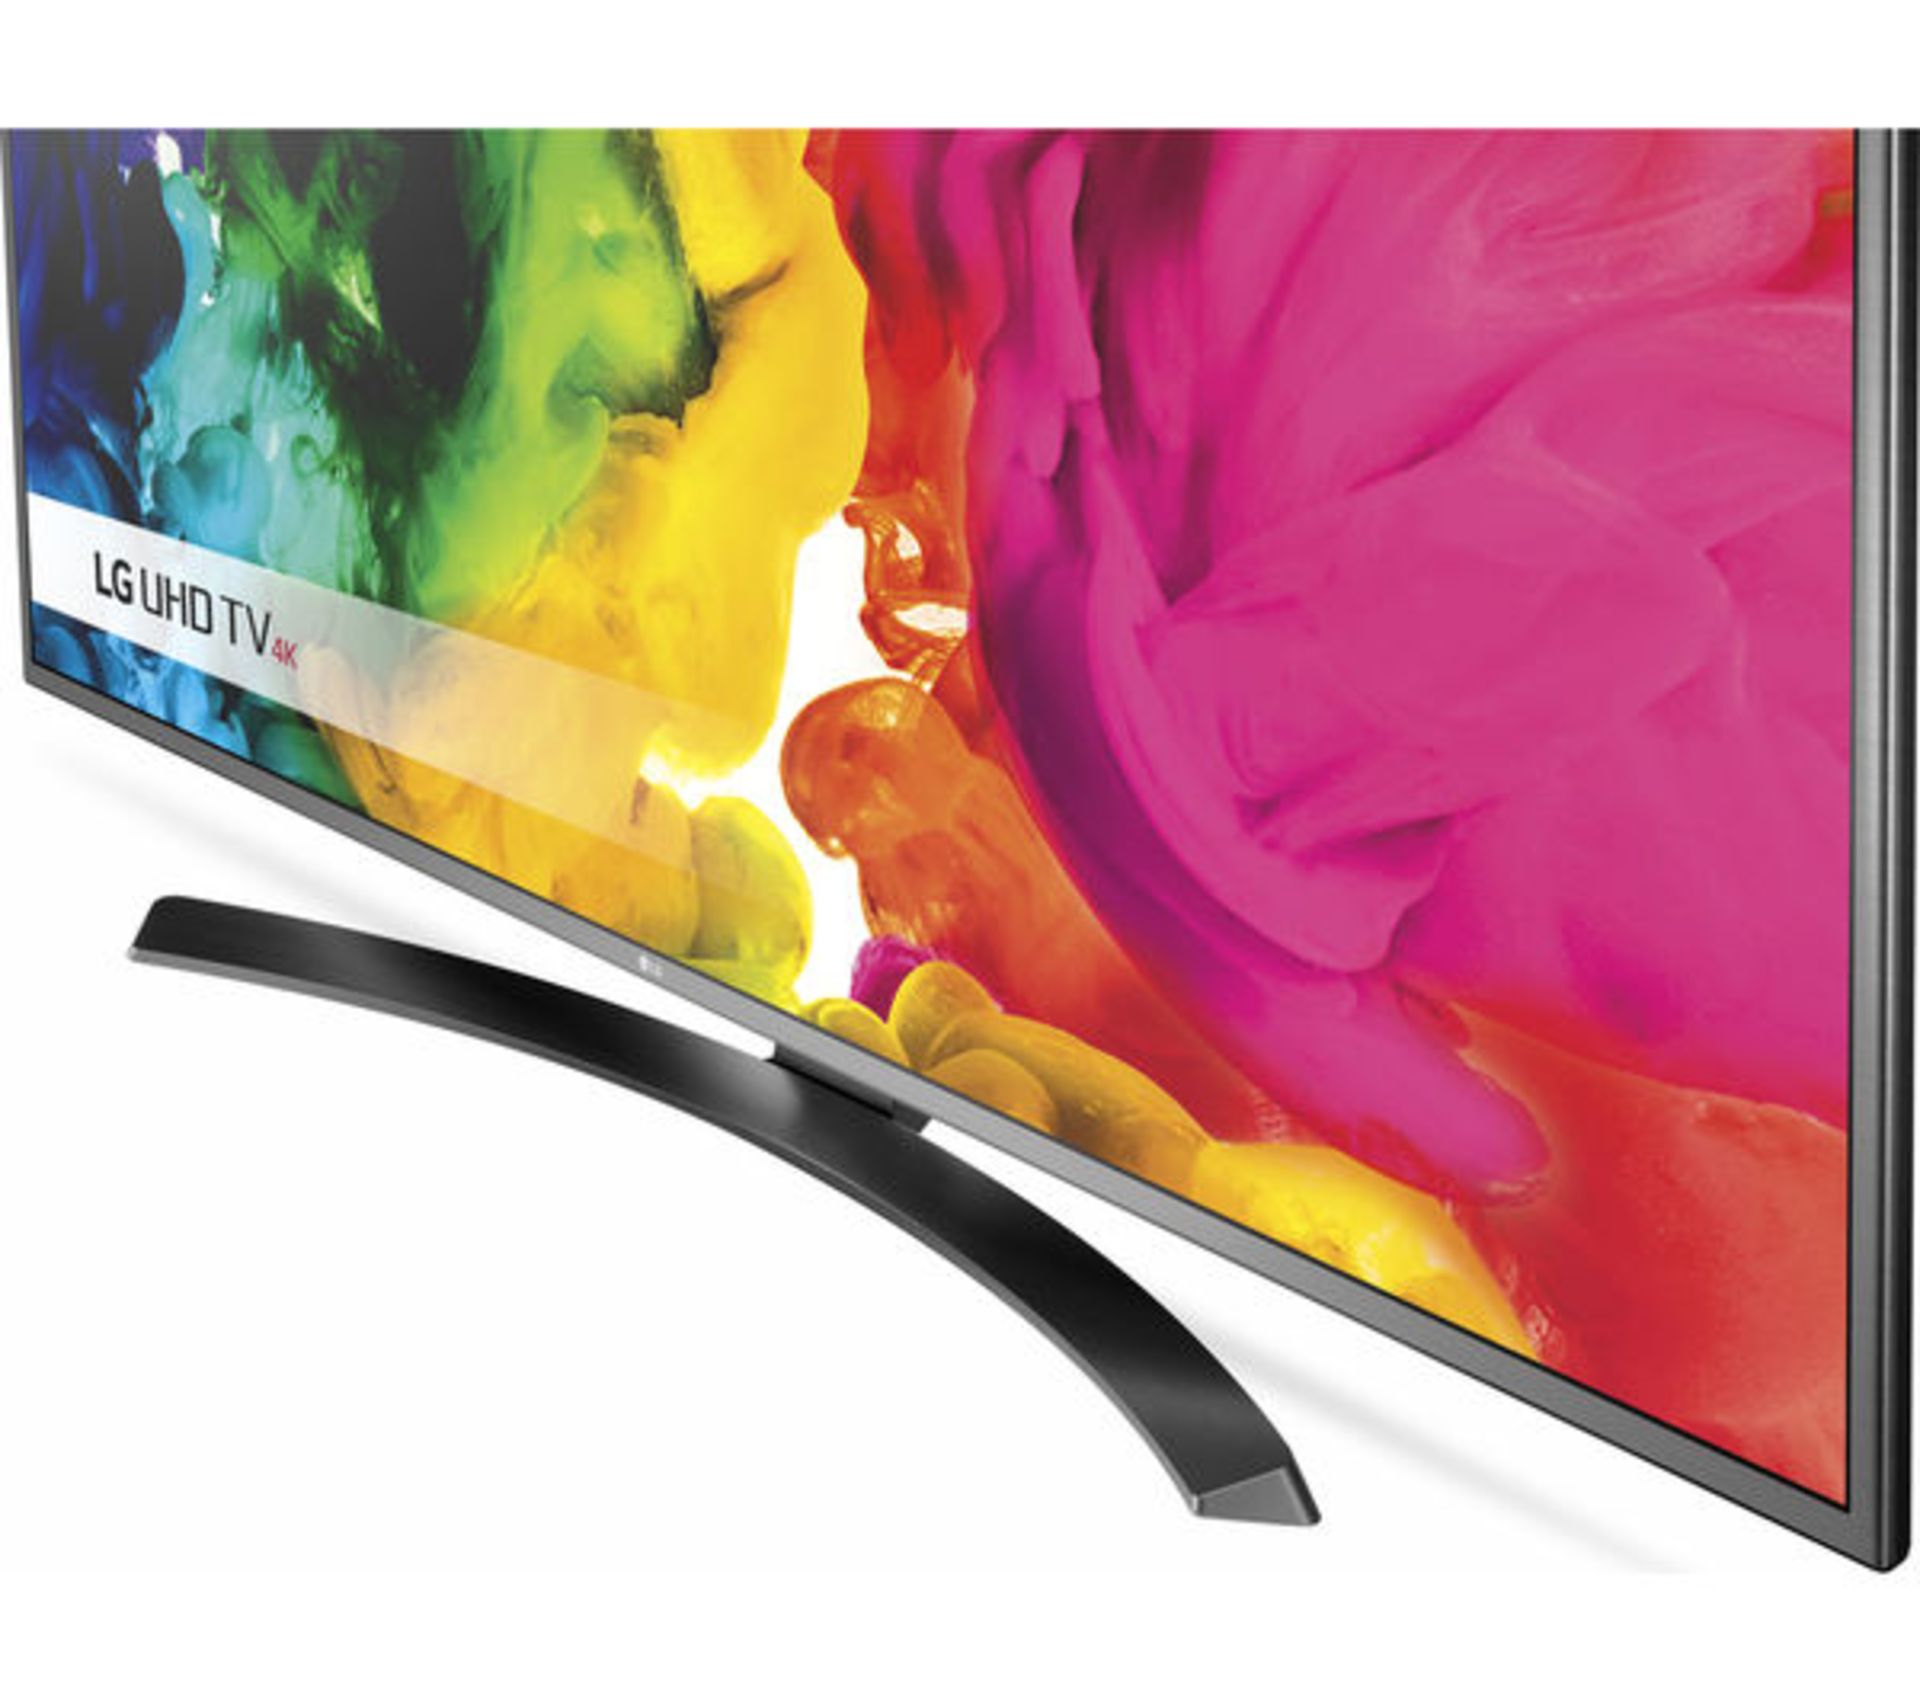 (T23) LG 49UH668V Smart 4k Ultra HD HDR 49" LED TV. RRP £749. Enhanced imagery Combining the - Image 5 of 5